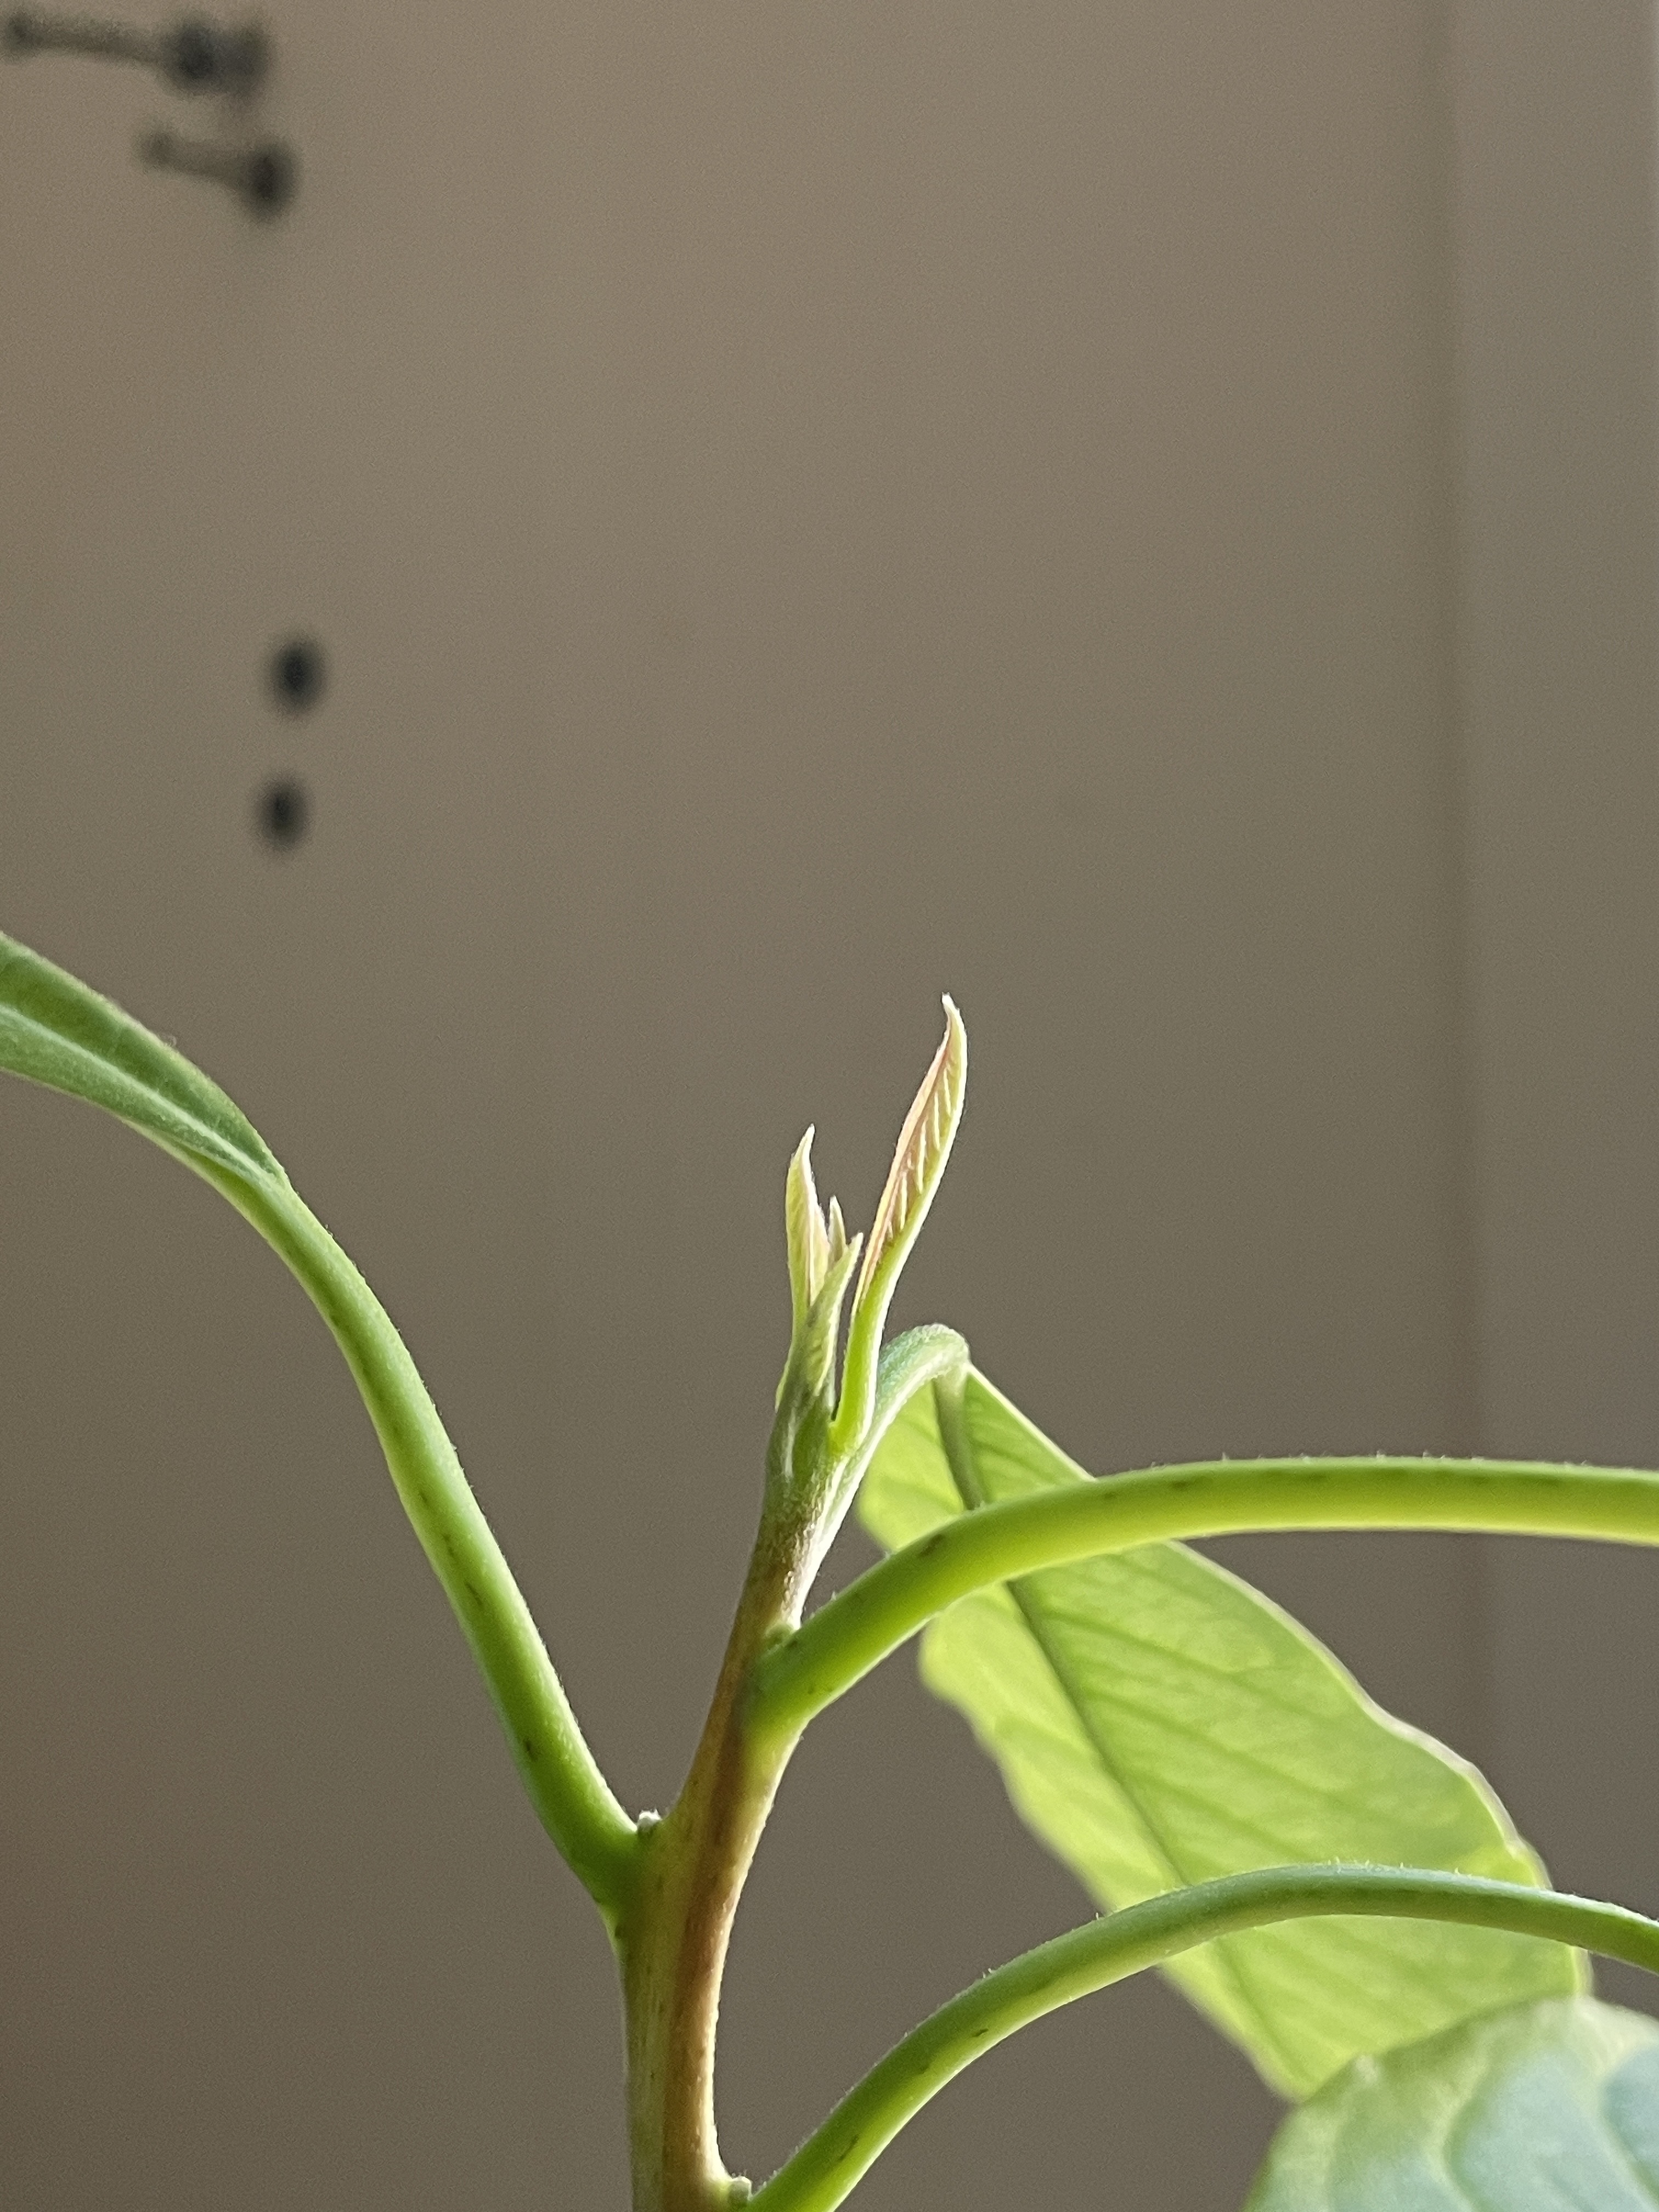 New growth on an avocado plant